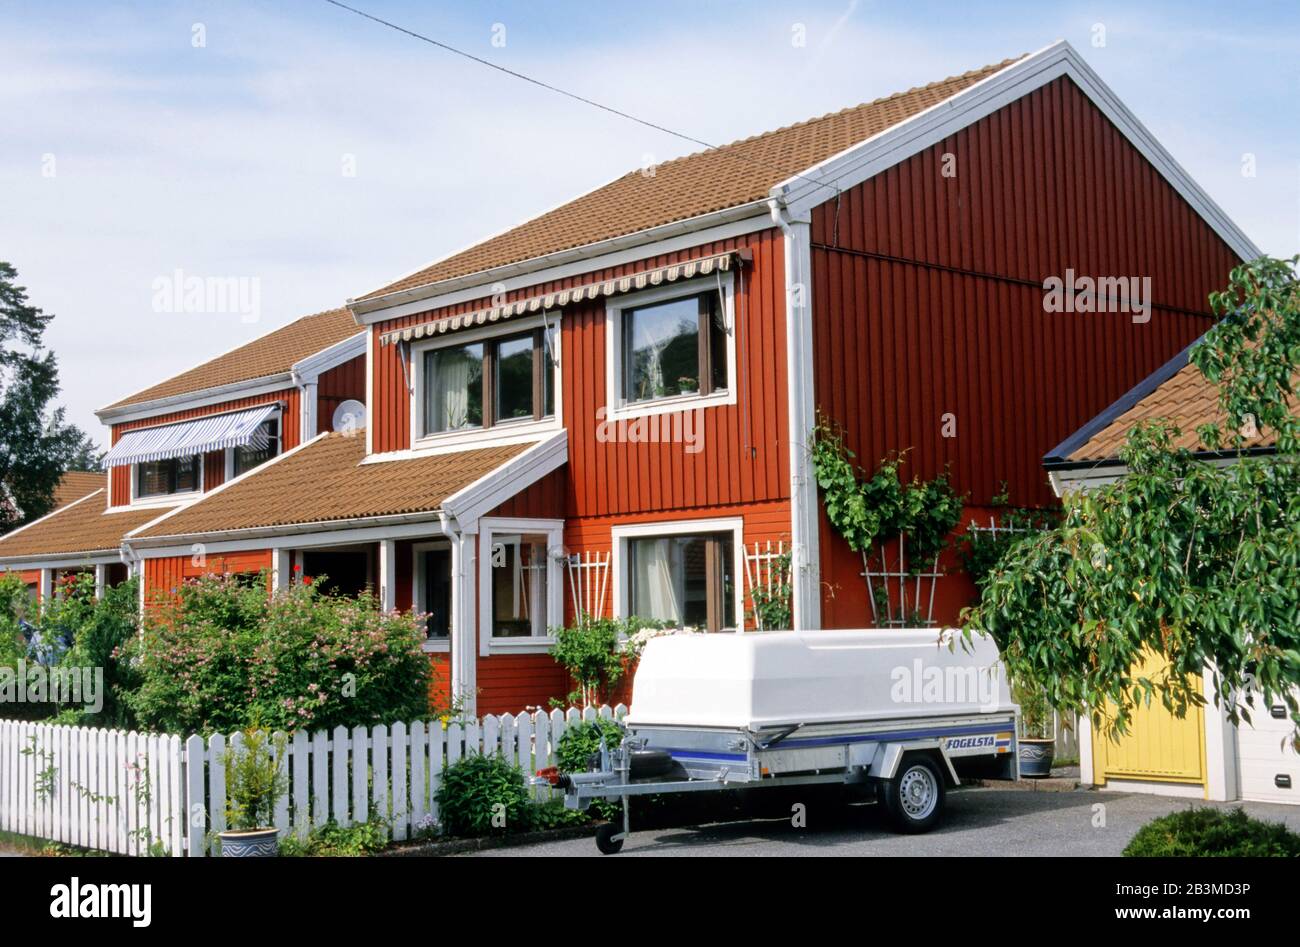 Bungalow house angered sweden Stock Photo